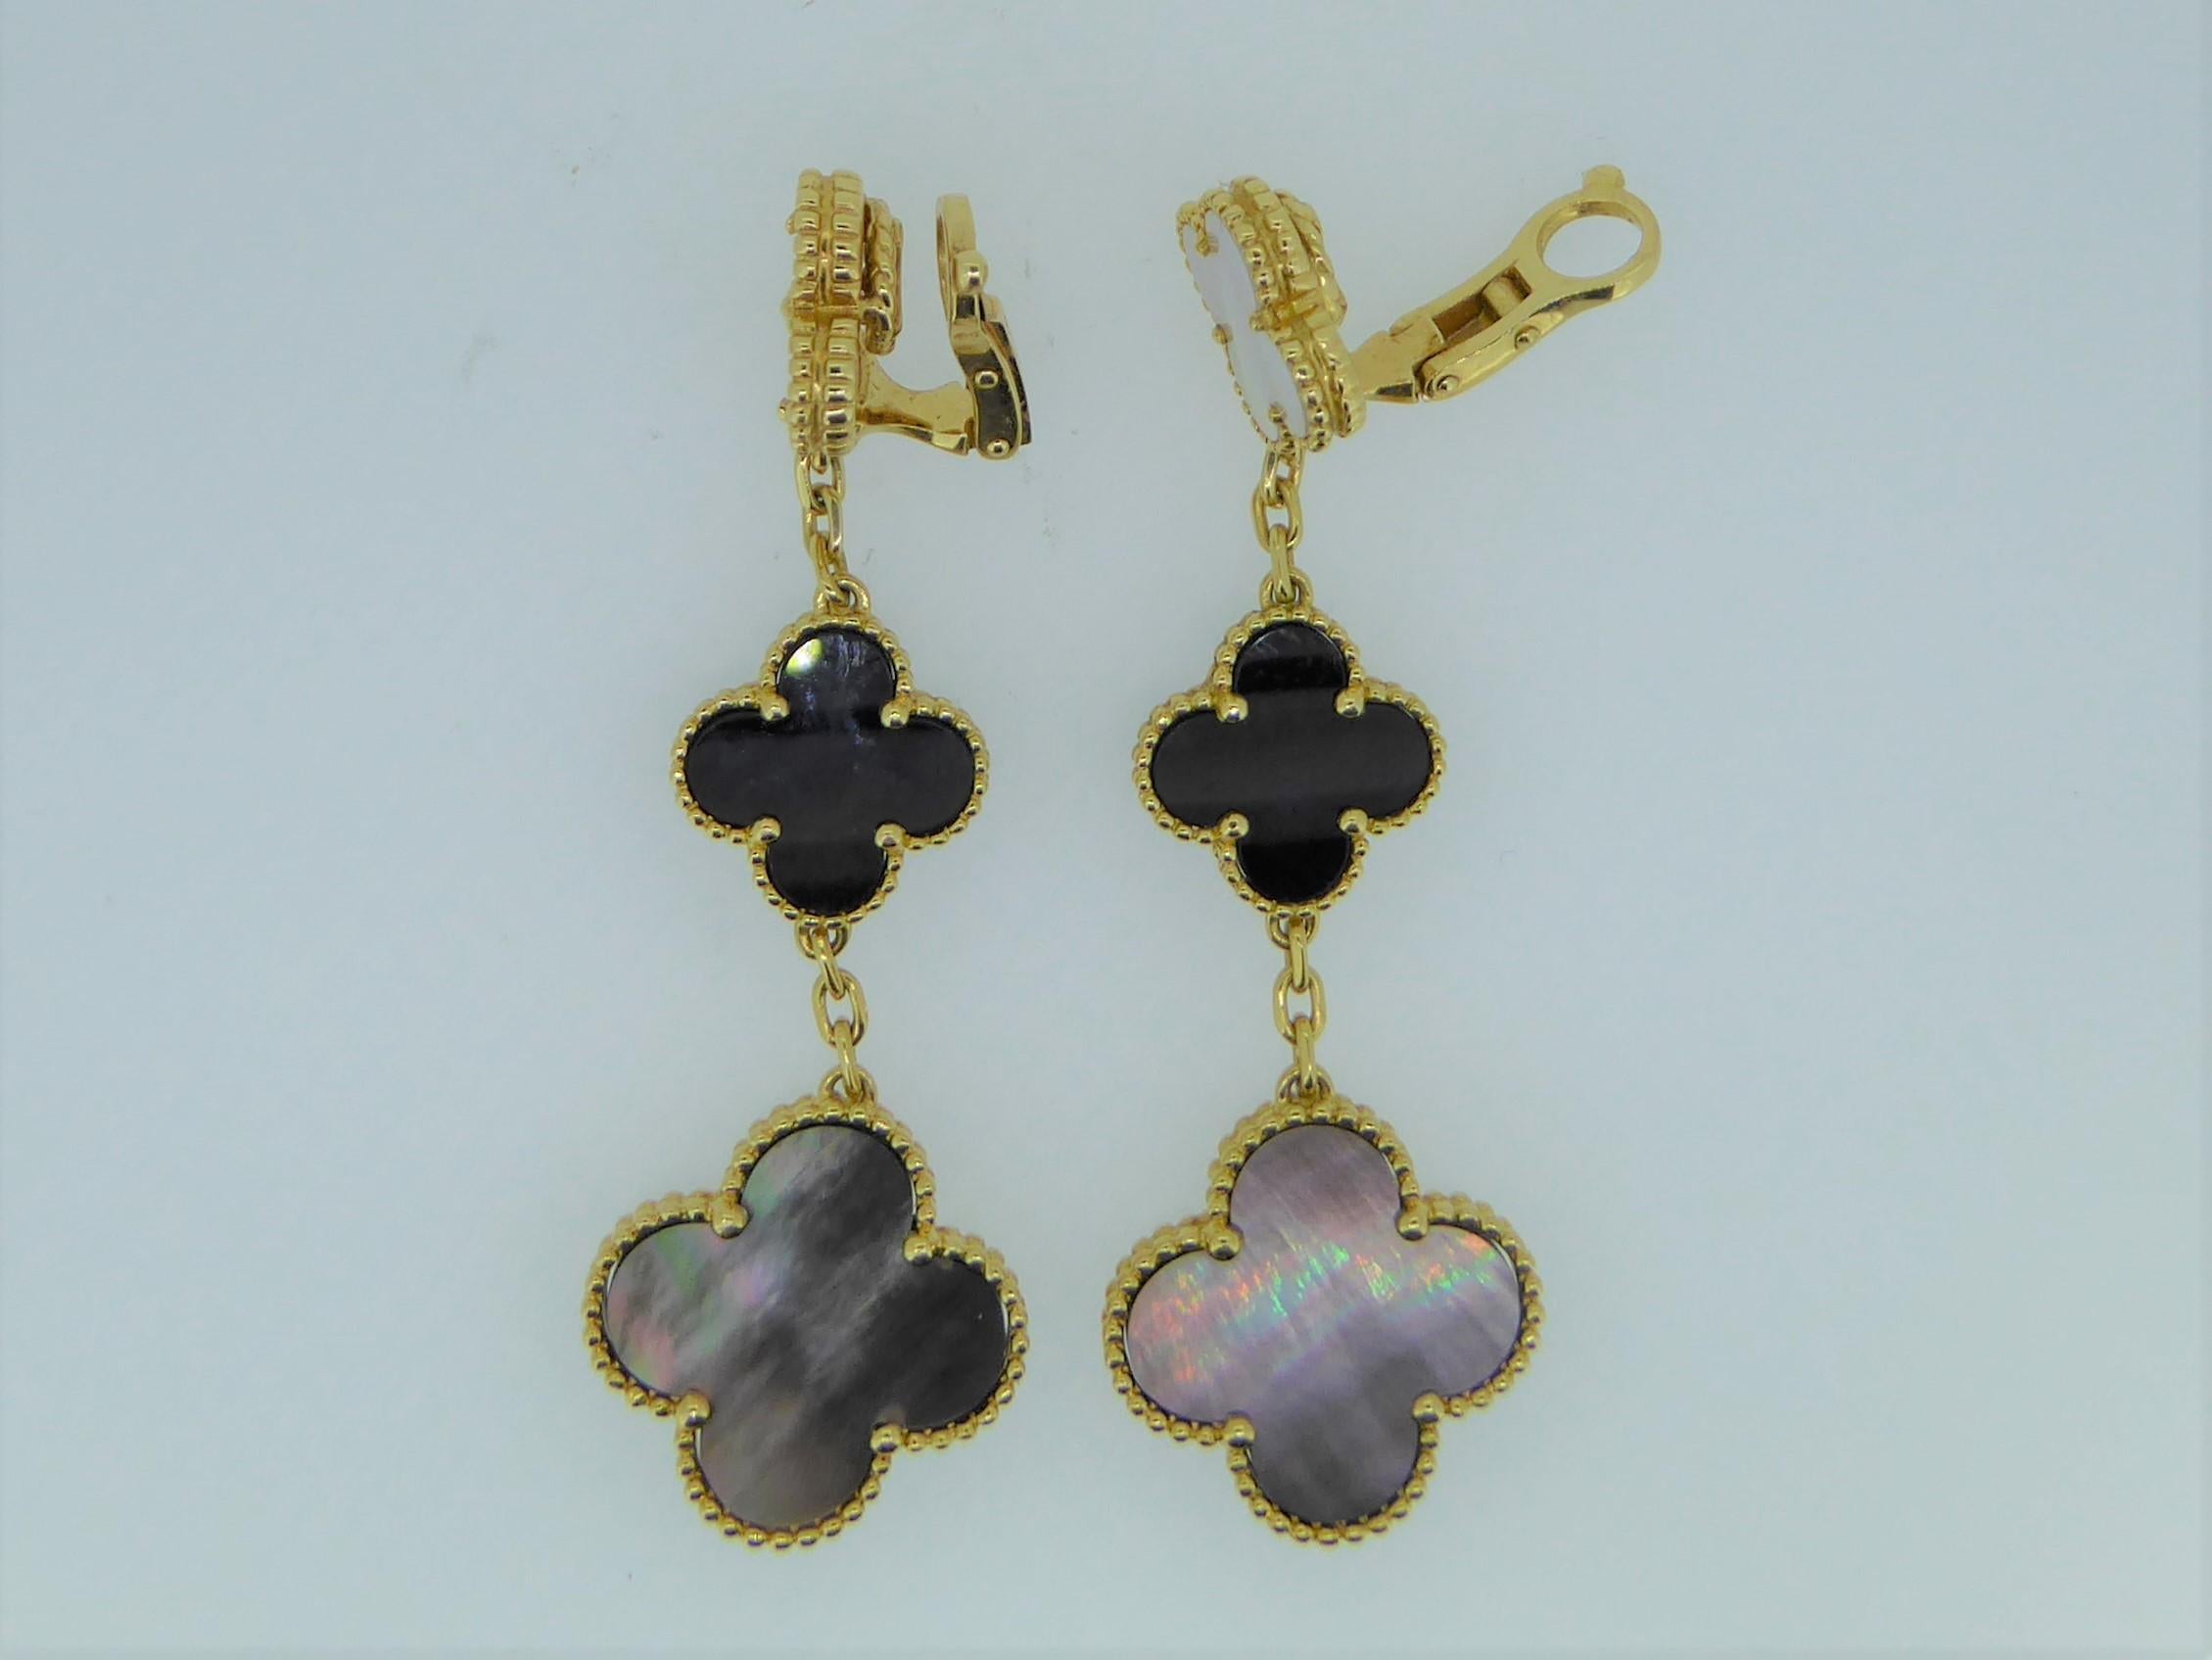 A pair of Van Cleef and Arpels Alhambra mother-of-pearl, onyx and 18ct yellow gold ear clips. Each ear clip with three graduating motif drops. Set in 18ct yellow gold. Each clip marked 